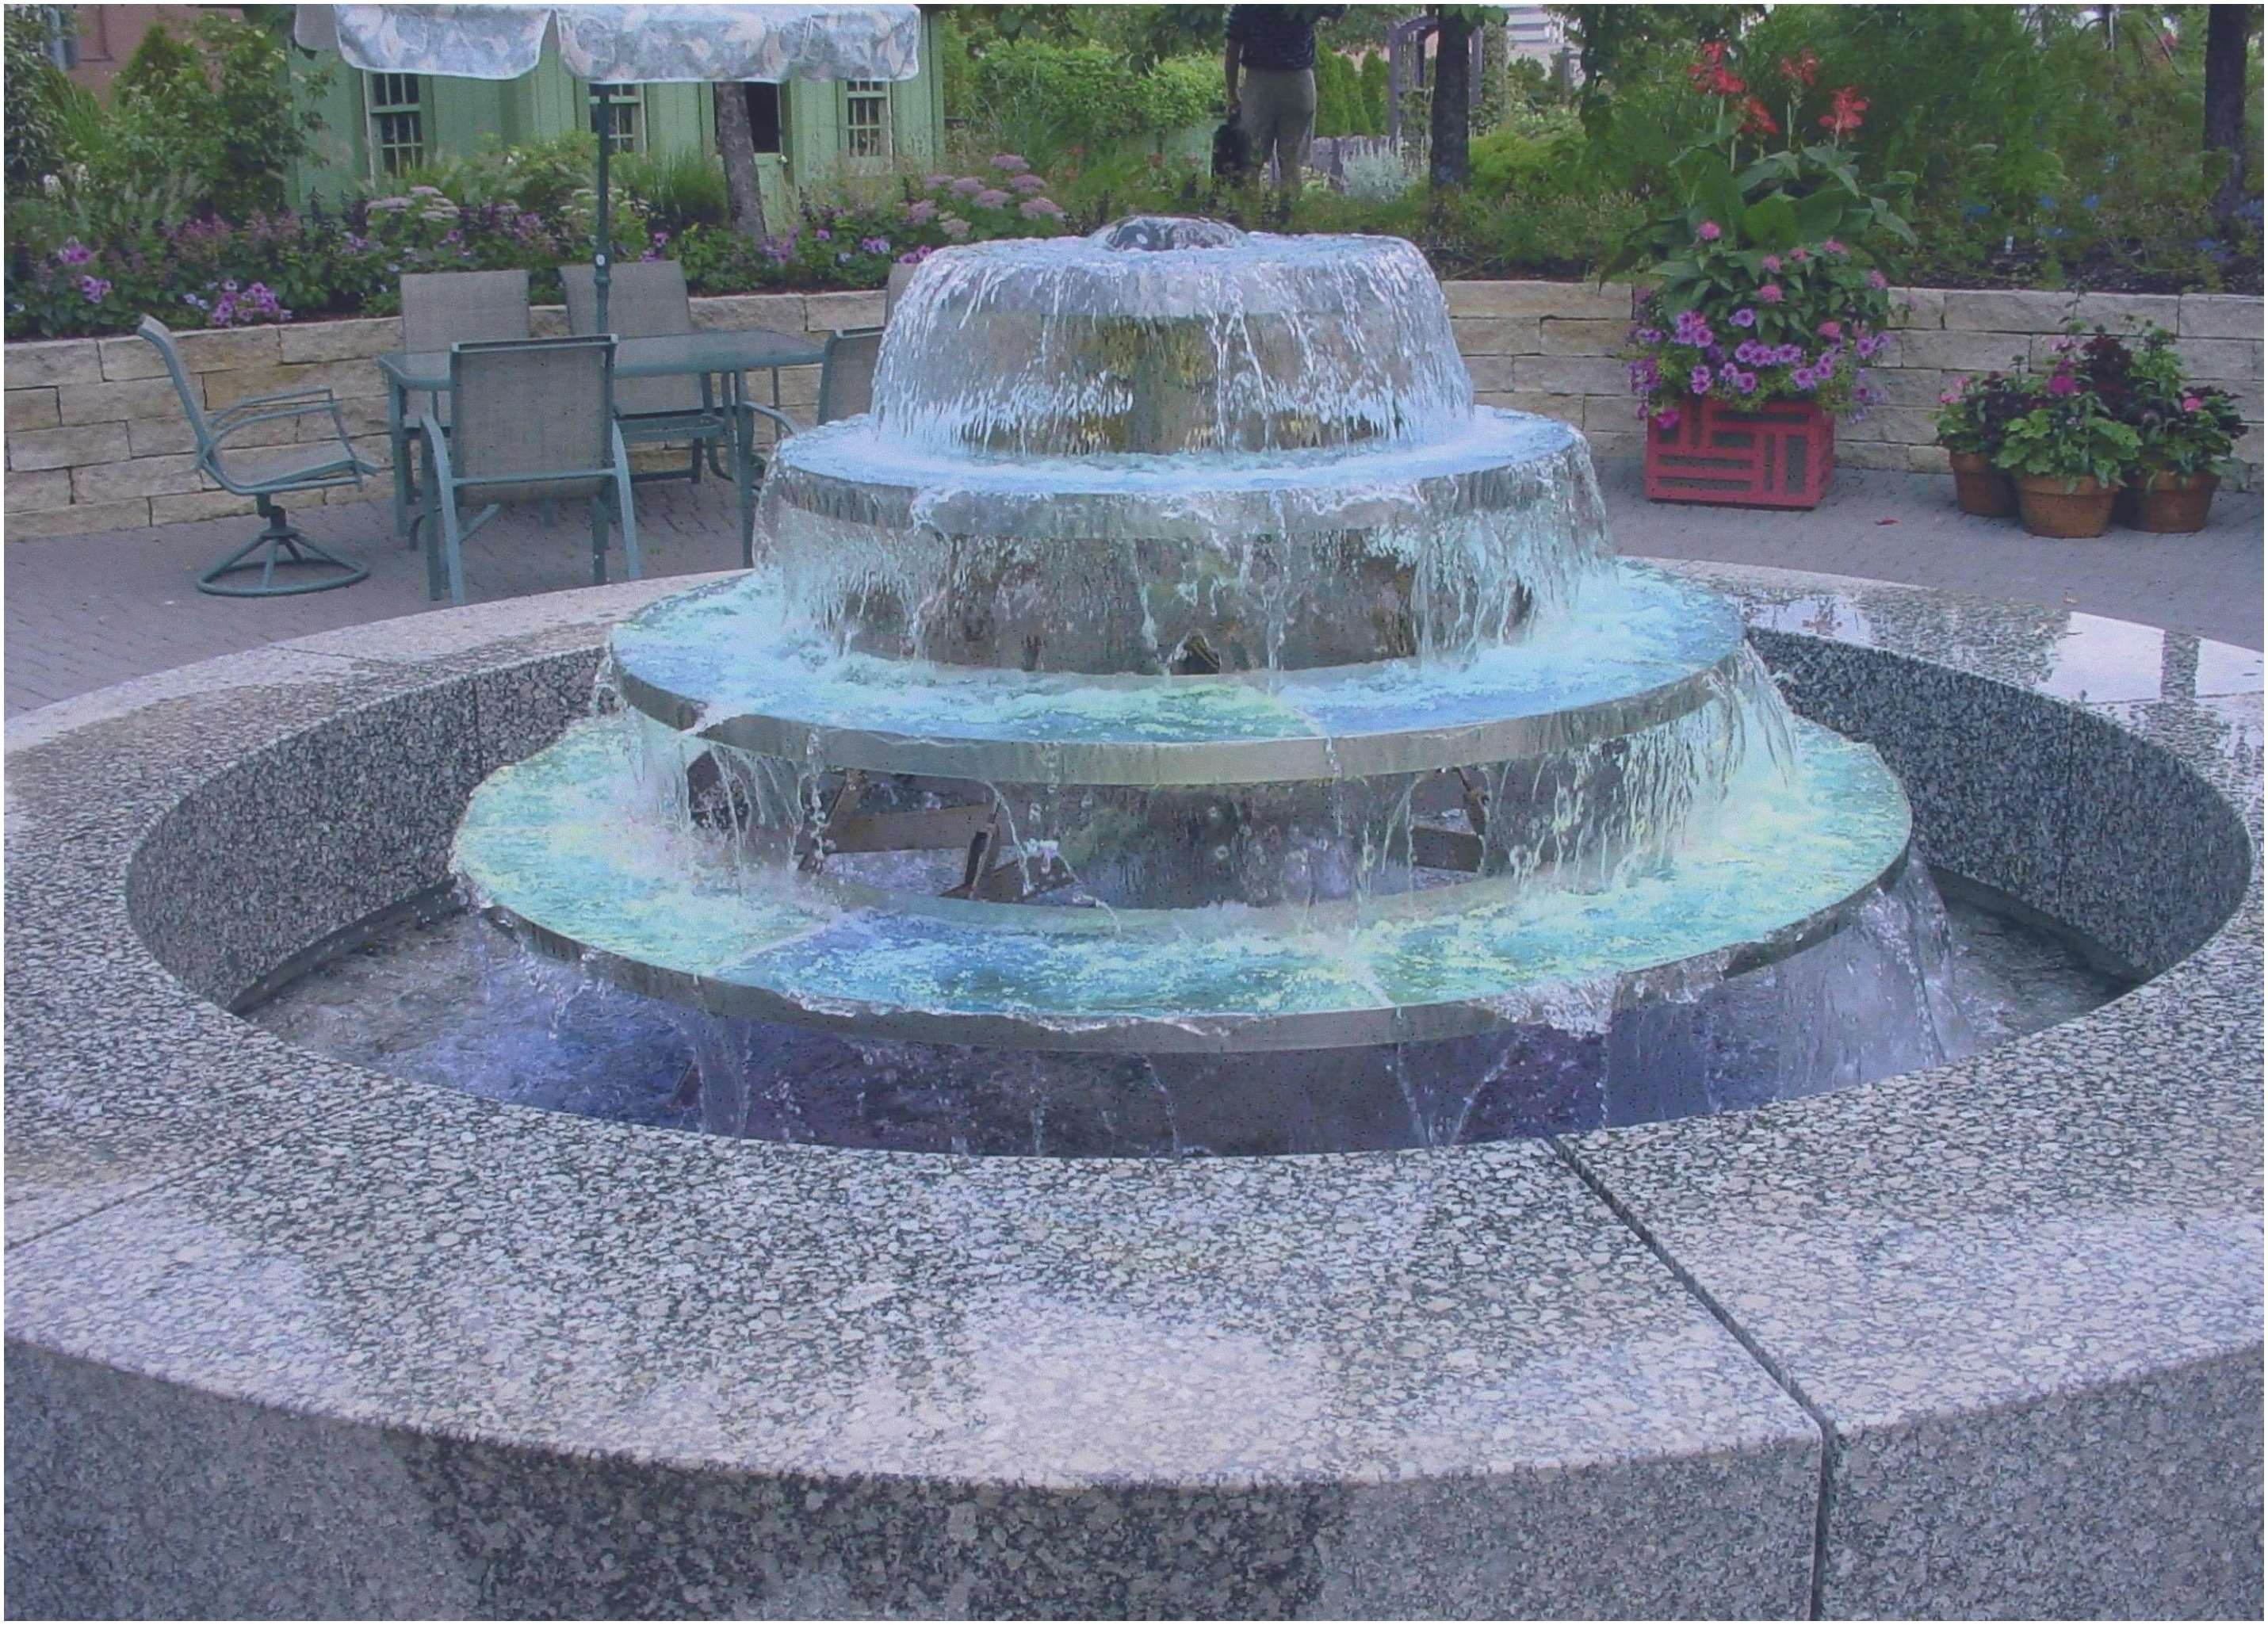 18 Nice Blue Vase Fountain 2024 free download blue vase fountain of decorative garden fountains picking out best garden rocks garden in decorative garden fountains updating your best 33 epic decorative outdoor fountains spice up your de